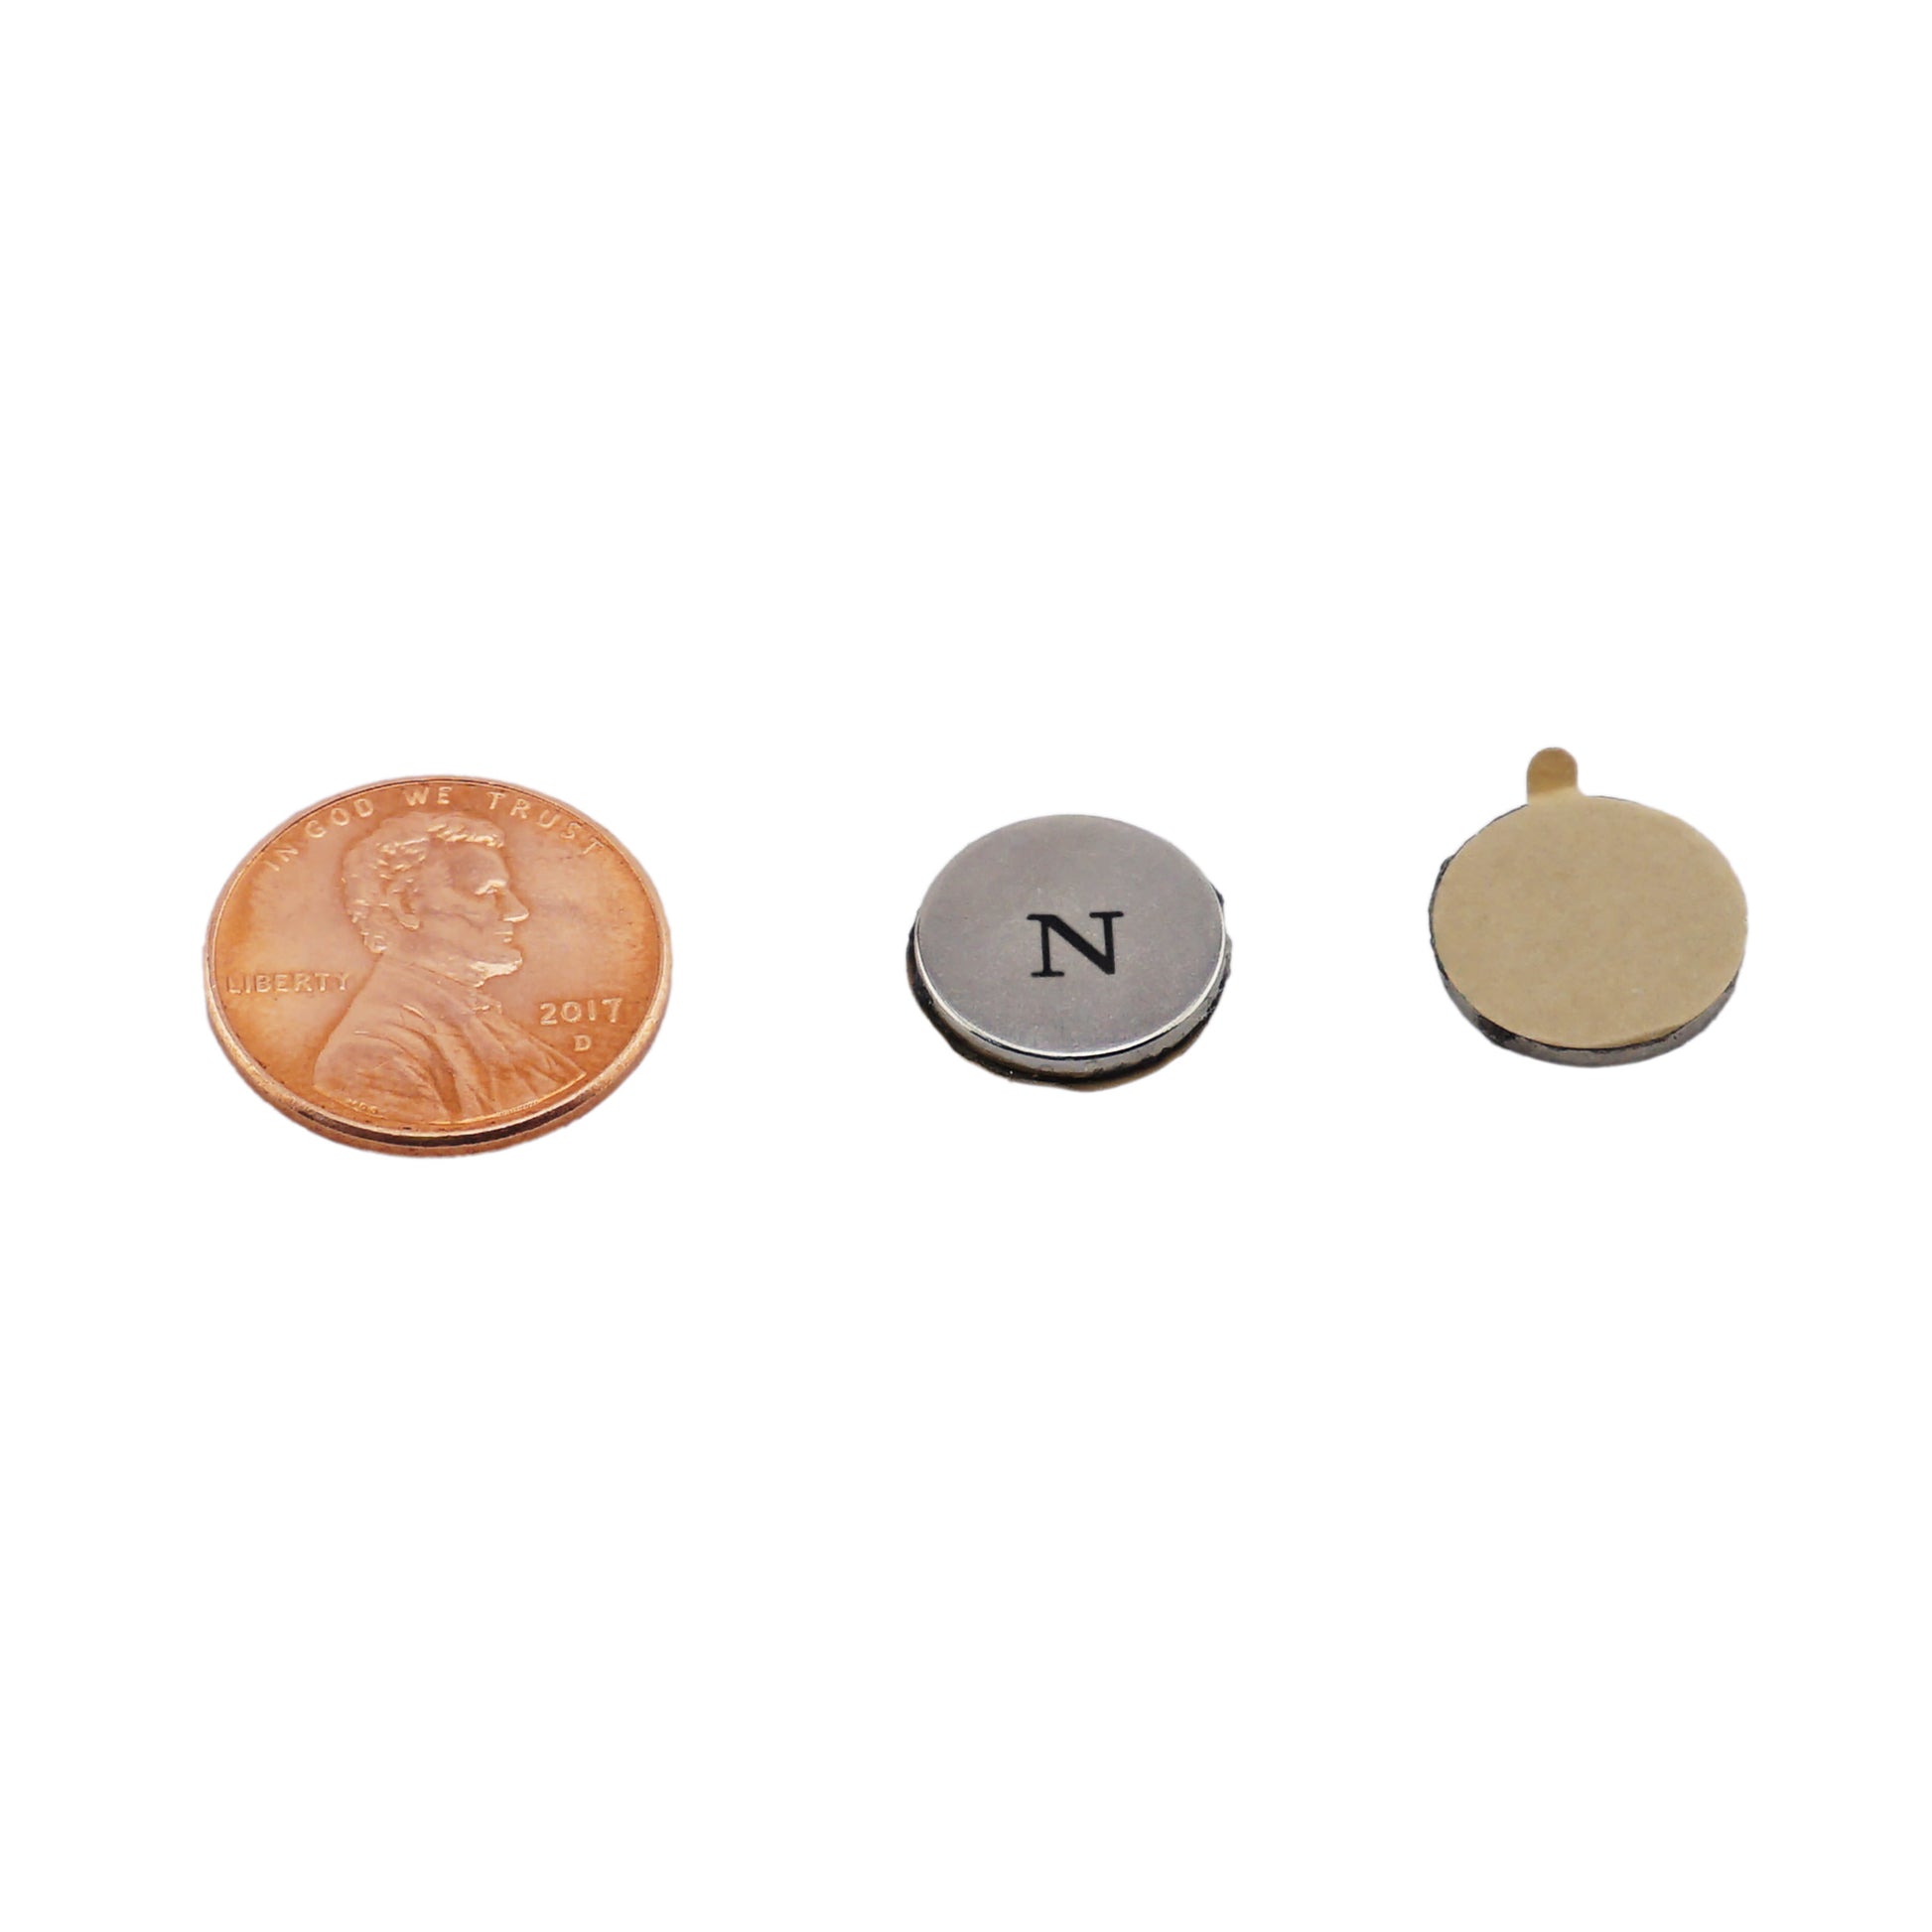 Load image into Gallery viewer, FTND50N Neodymium Disc Magnet with Adhesive - Compared to Penny for Size Reference